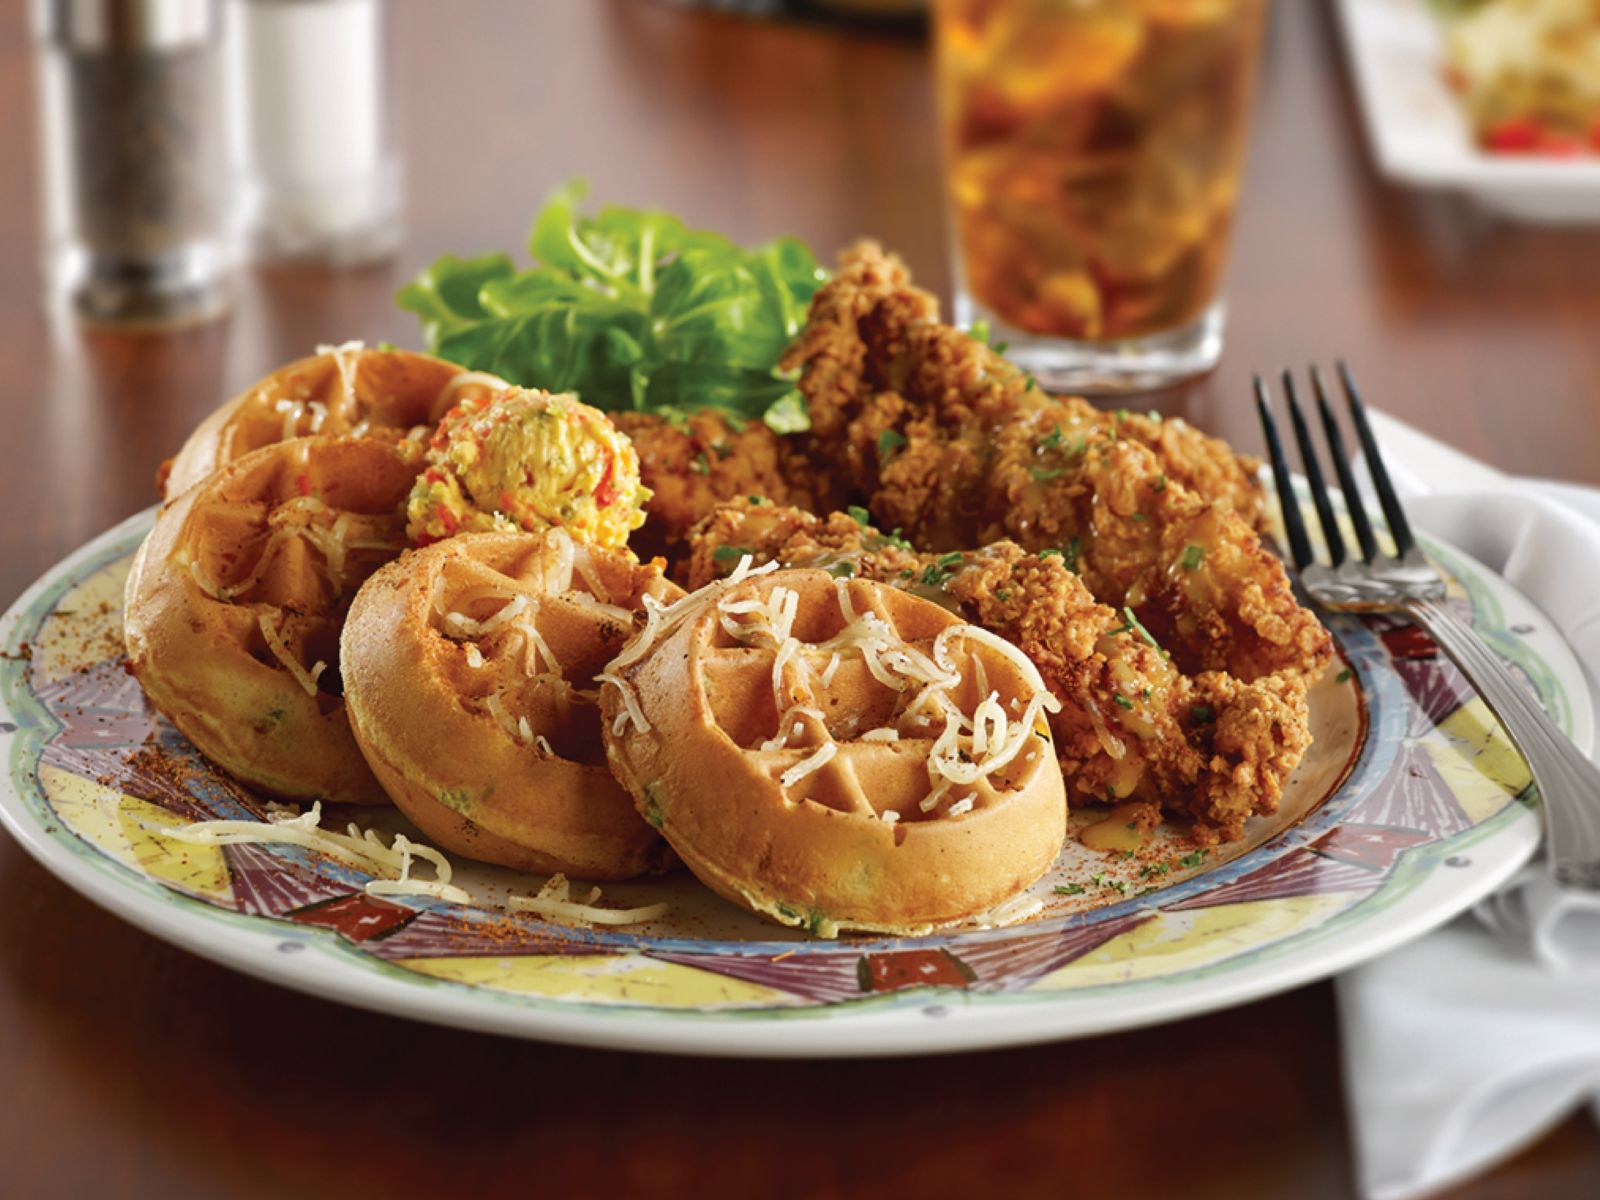 Visit Miss Shirley's Cafe for a delectable dish of fried chicken and waffles served on a plate. You'll love the delightful flavors and the convenient parking available.